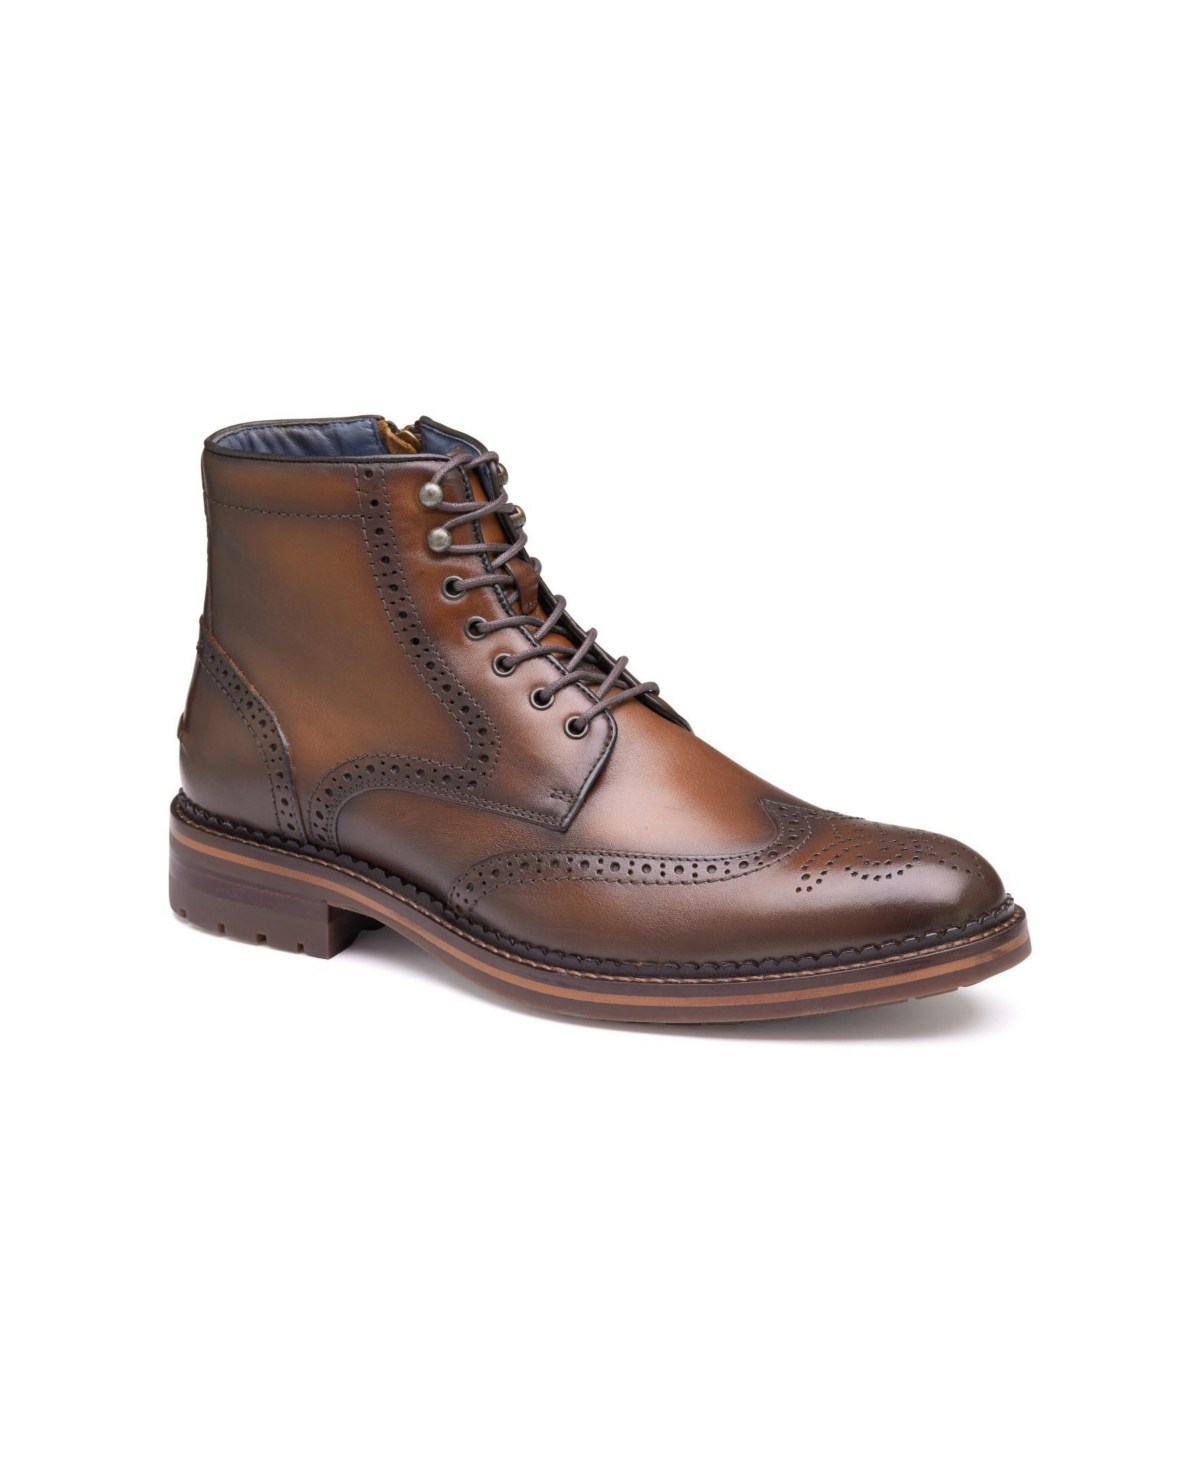 JOHNSTON & MURPHY MEN'S CONNELLY LEATHER WINGTIP BOOTS